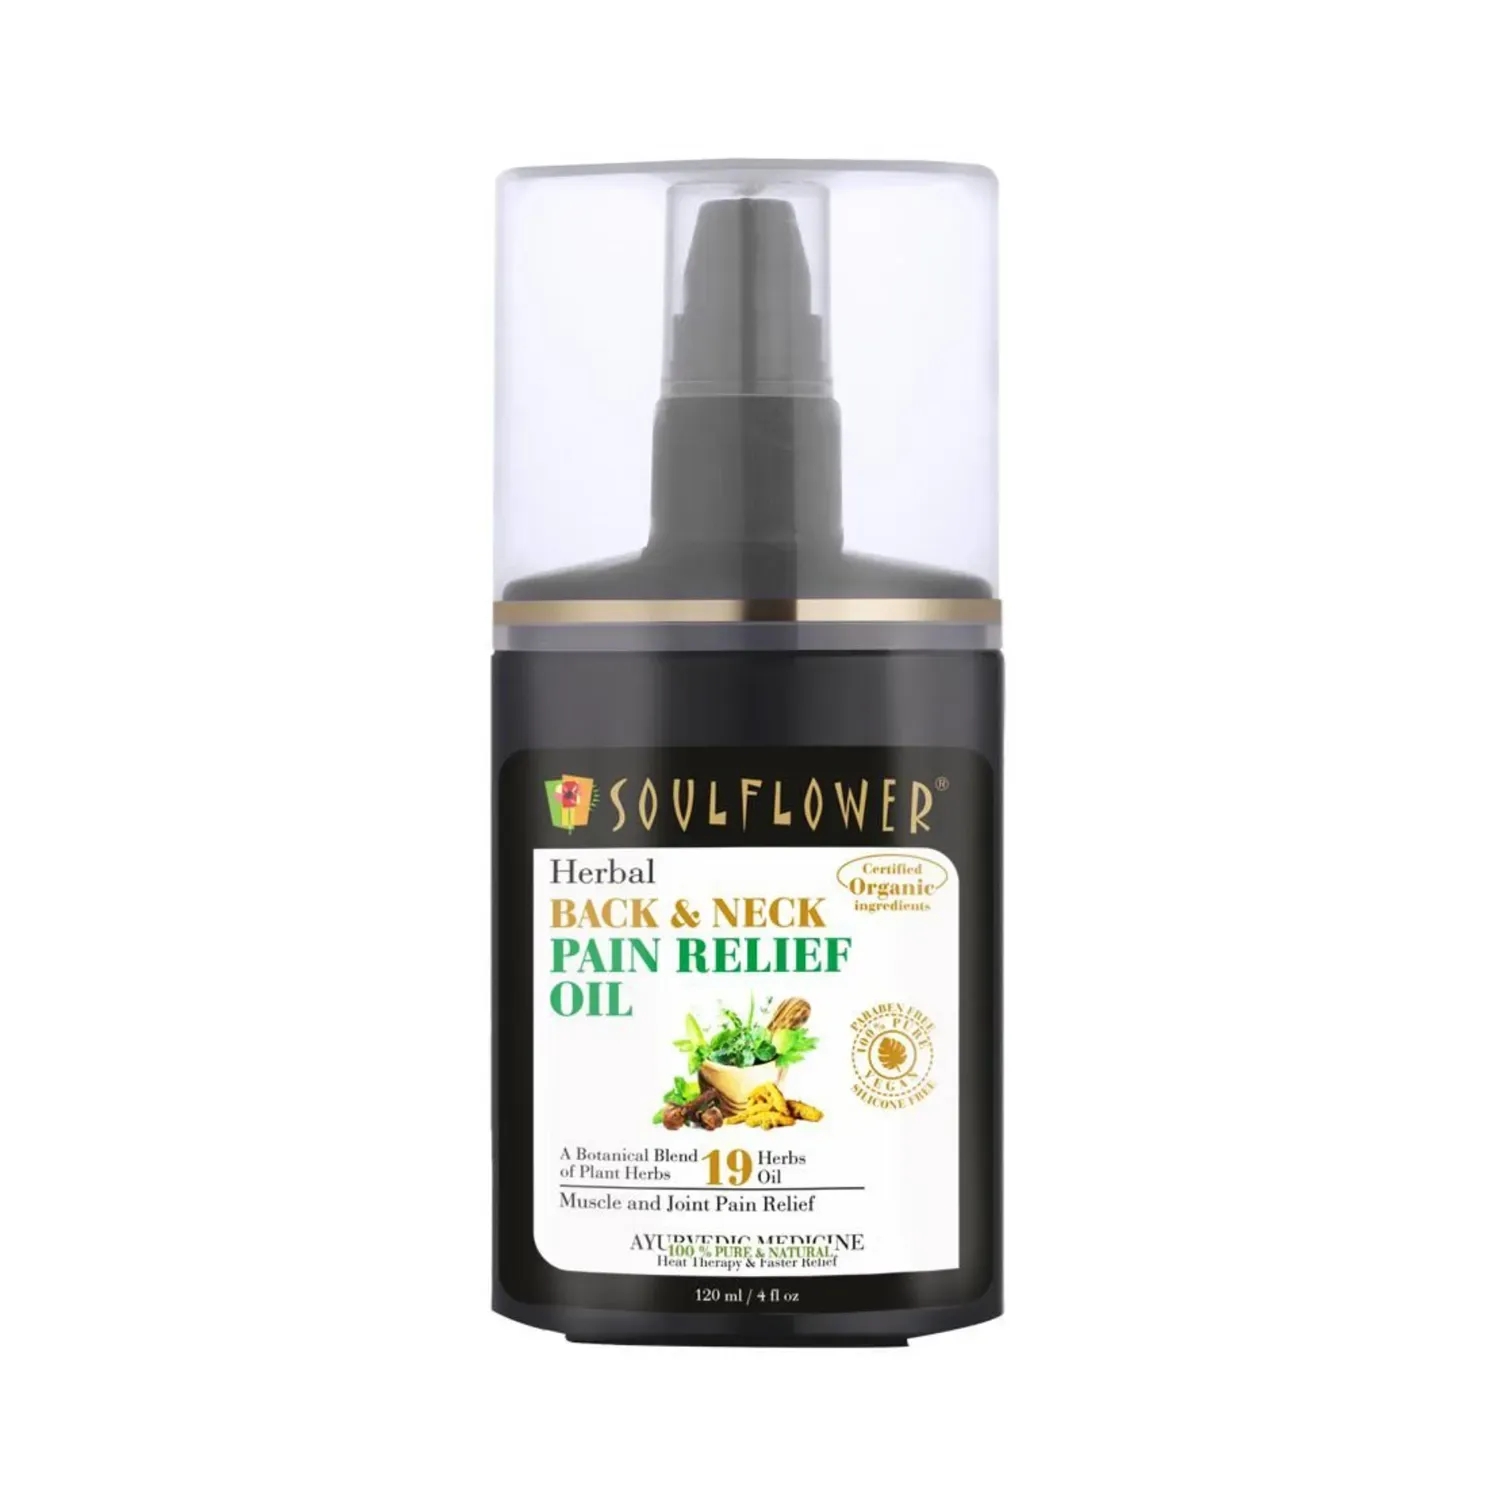 Soulflower | Soulflower Back & Neck Pain Relief Oil - (120ml)